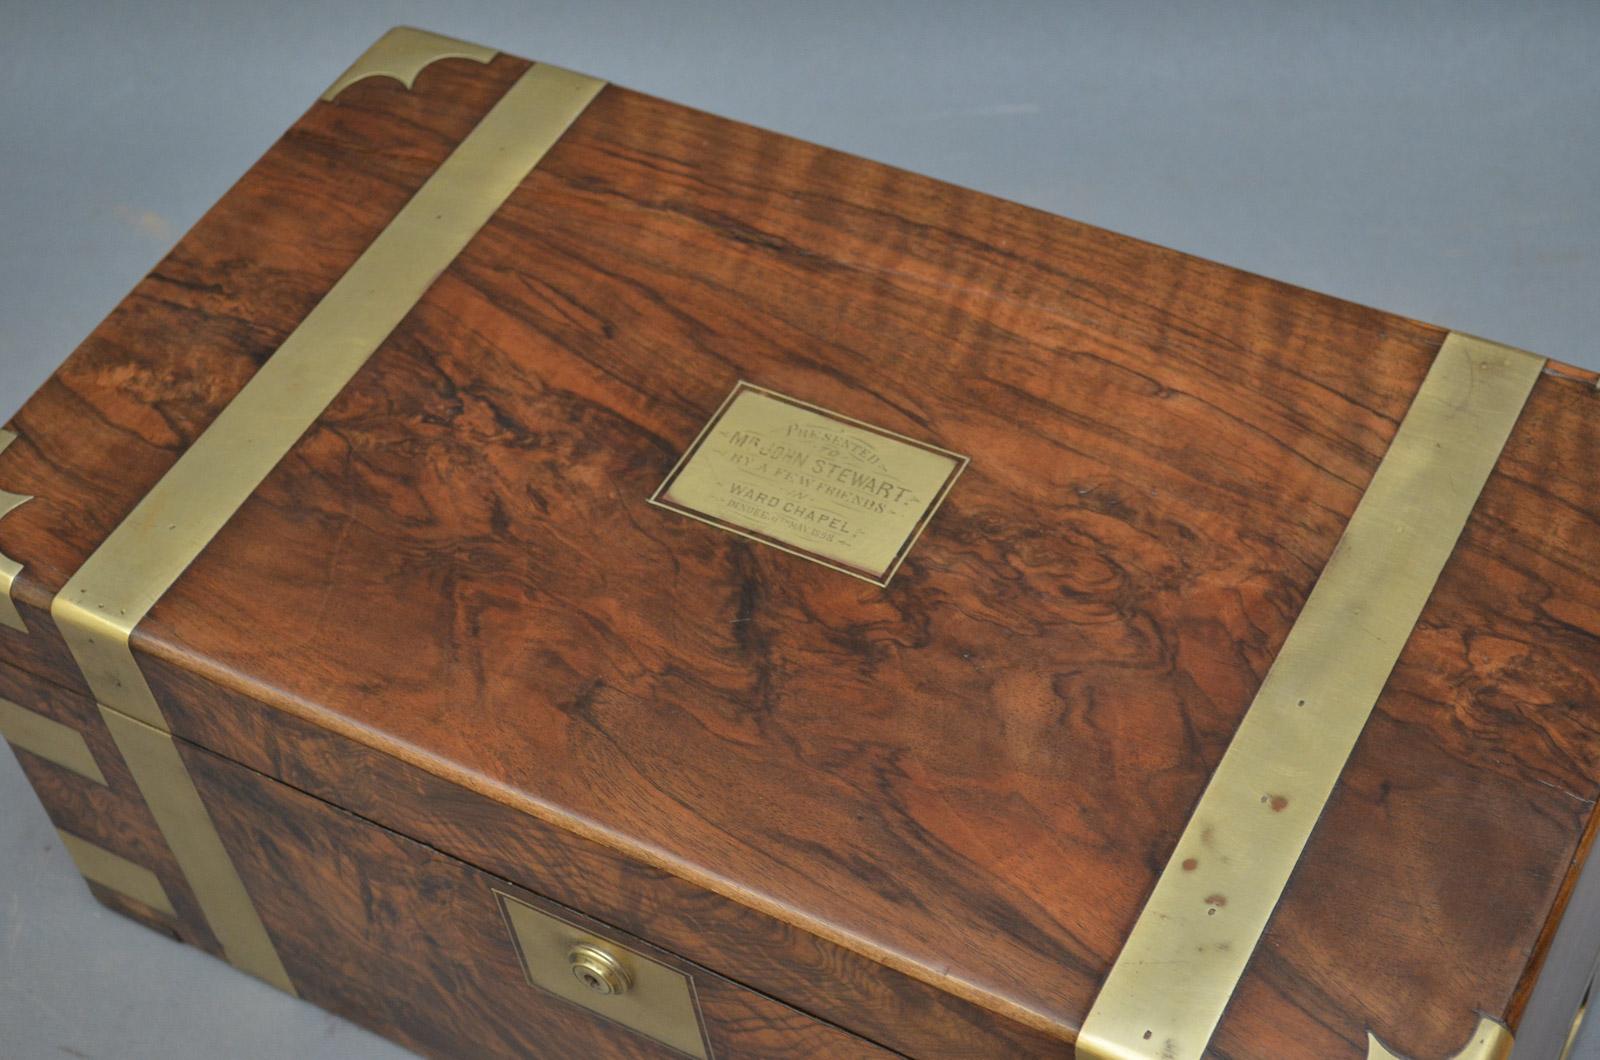 Sn3250 exceptional Victorian, figured walnut writing box with brass bound edges and carrying handles, enclosing black inset tooled leather writing surface, pen tray, ink well and 3 secret drawers, all in wonderful condition throughout, ready to